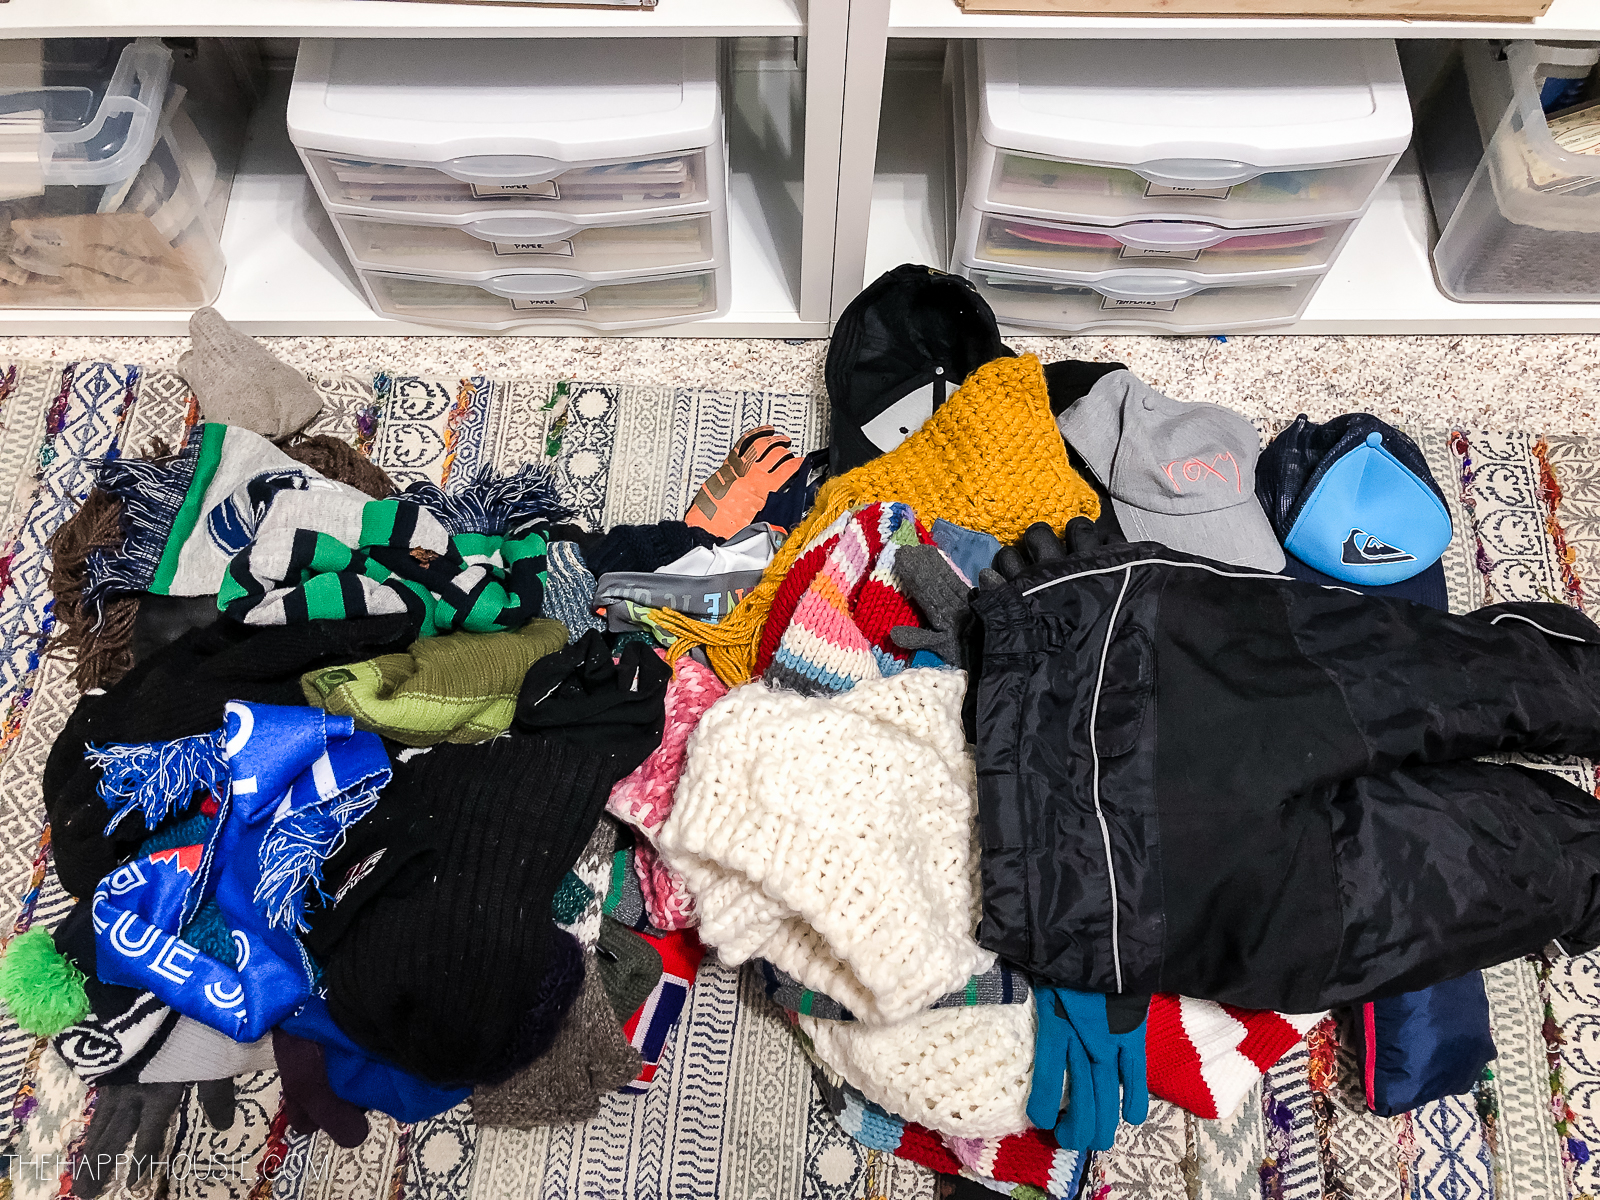 The clothes and scarves are the ground for sorting.